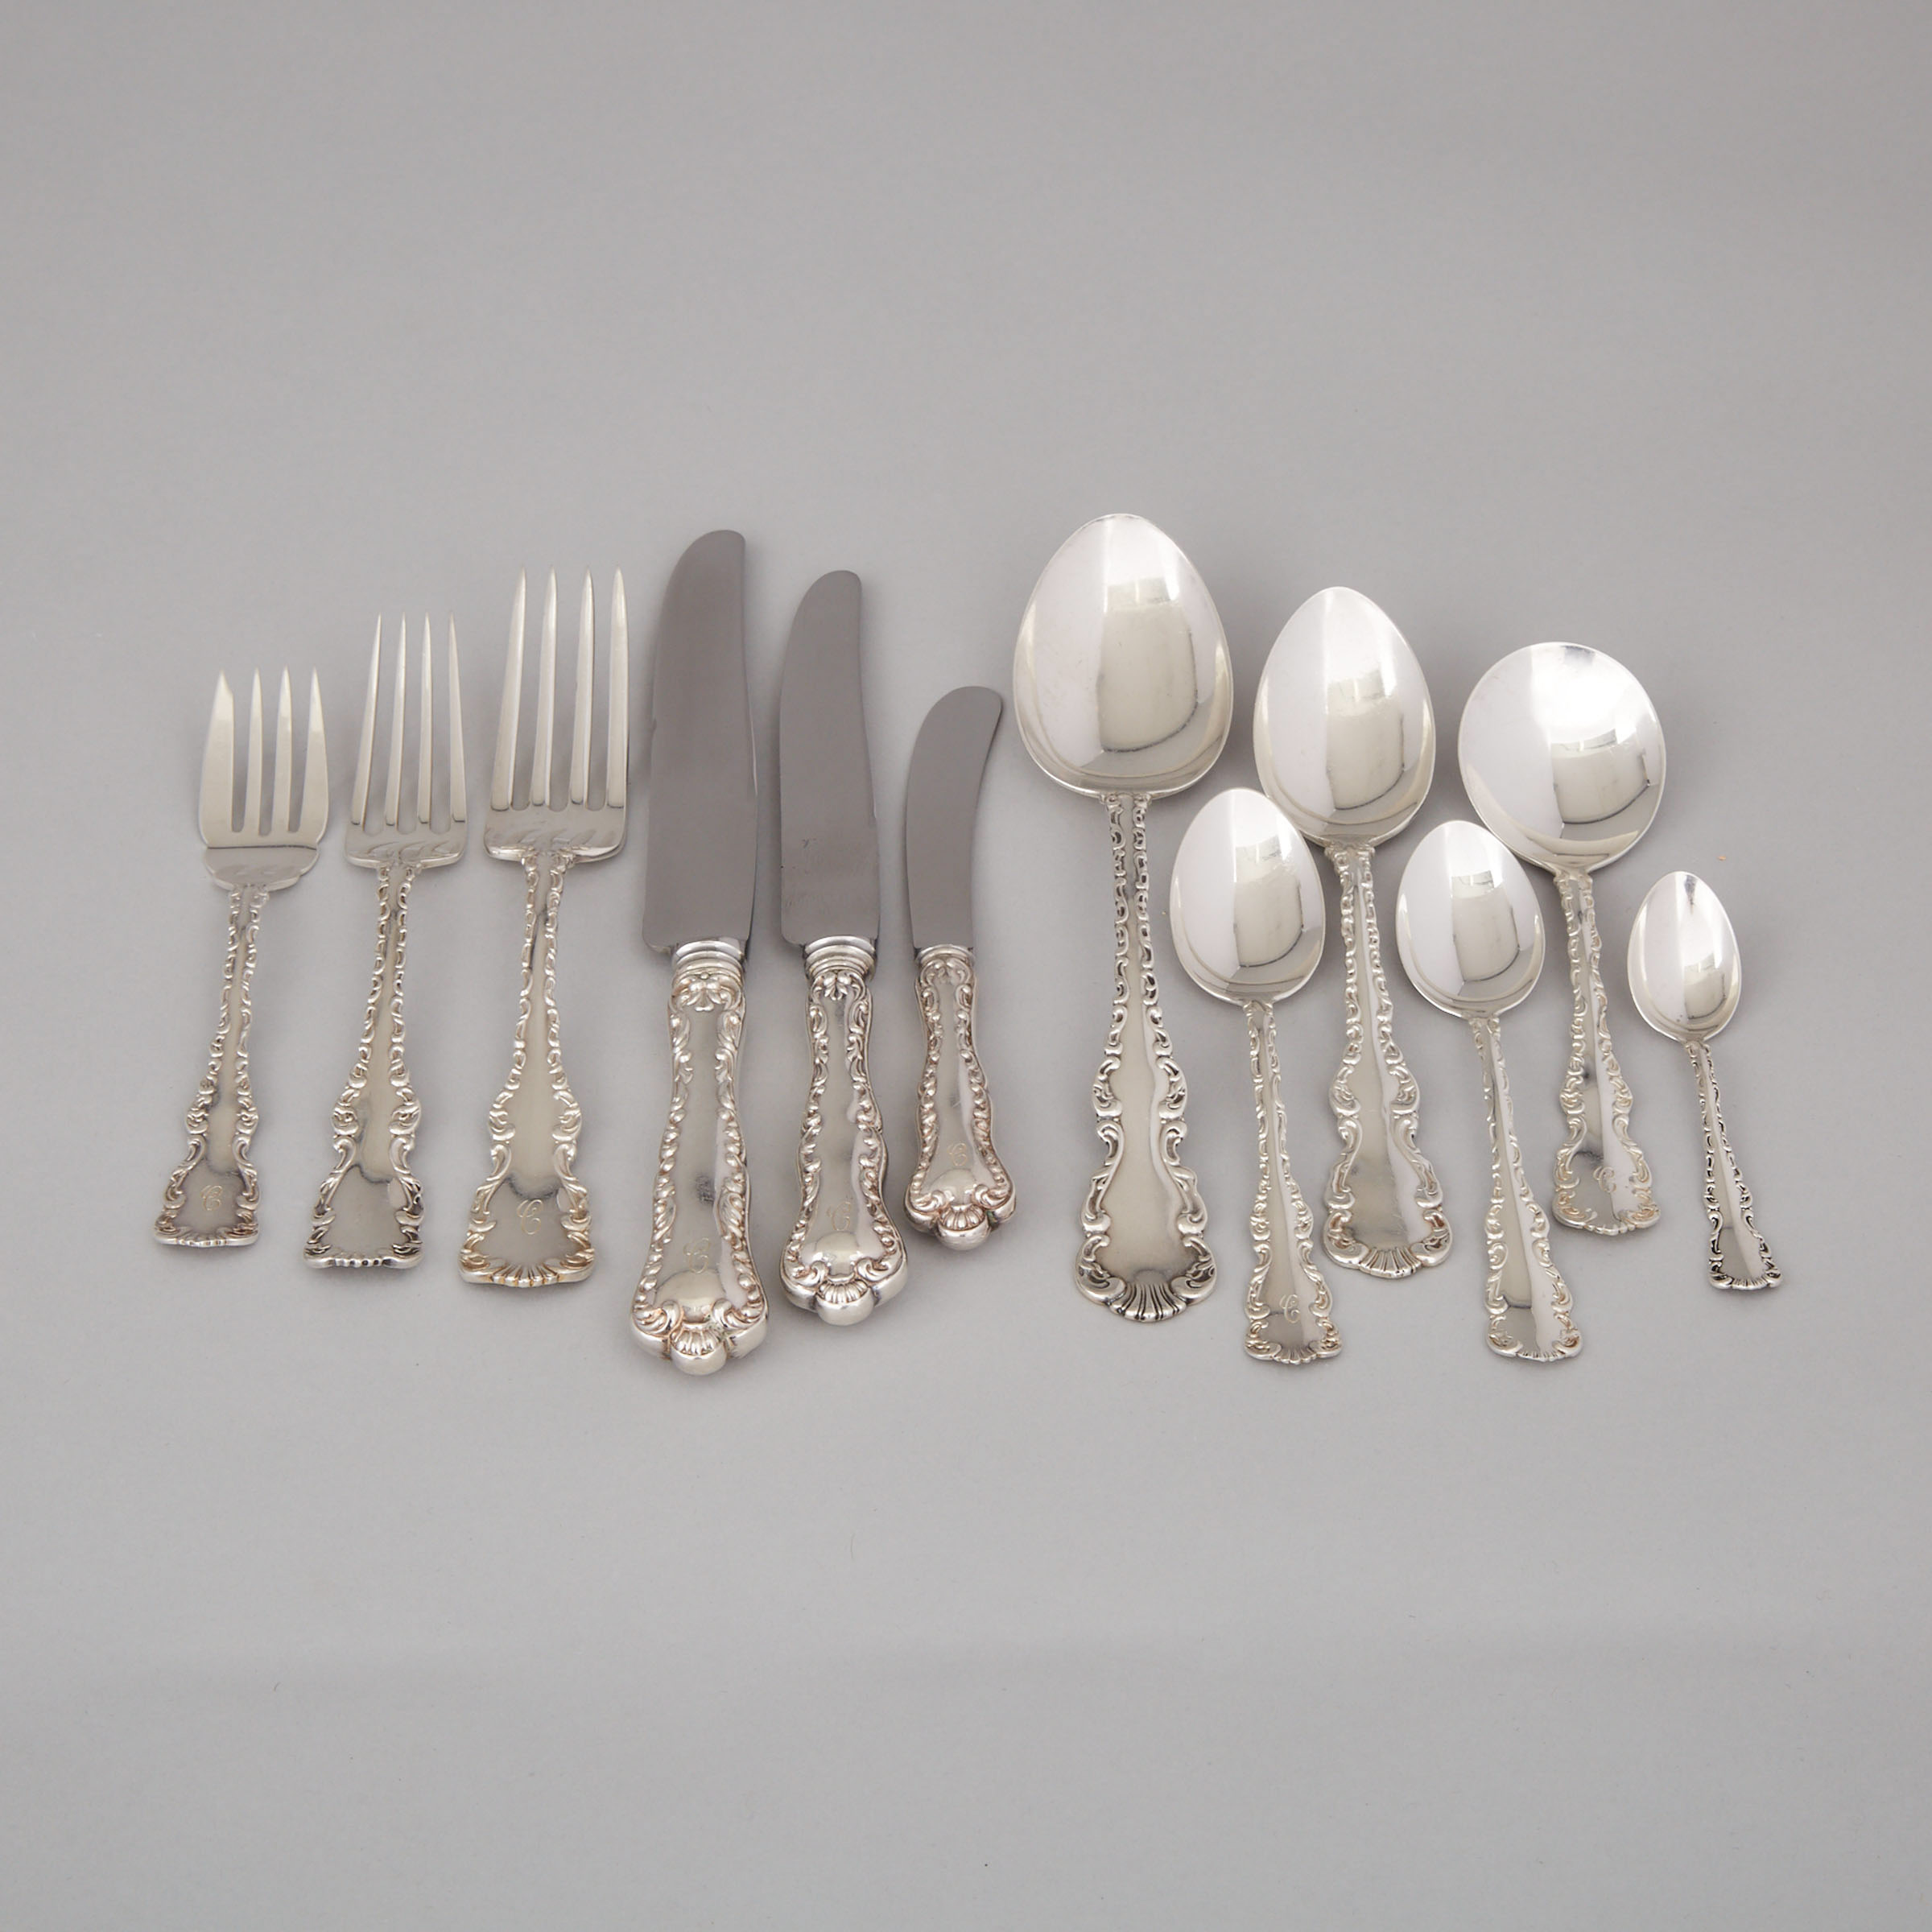 Canadian Silver 'Louis XV' Pattern Flatware, mainly Henry Birks & Sons, Montreal, Que., 20th century